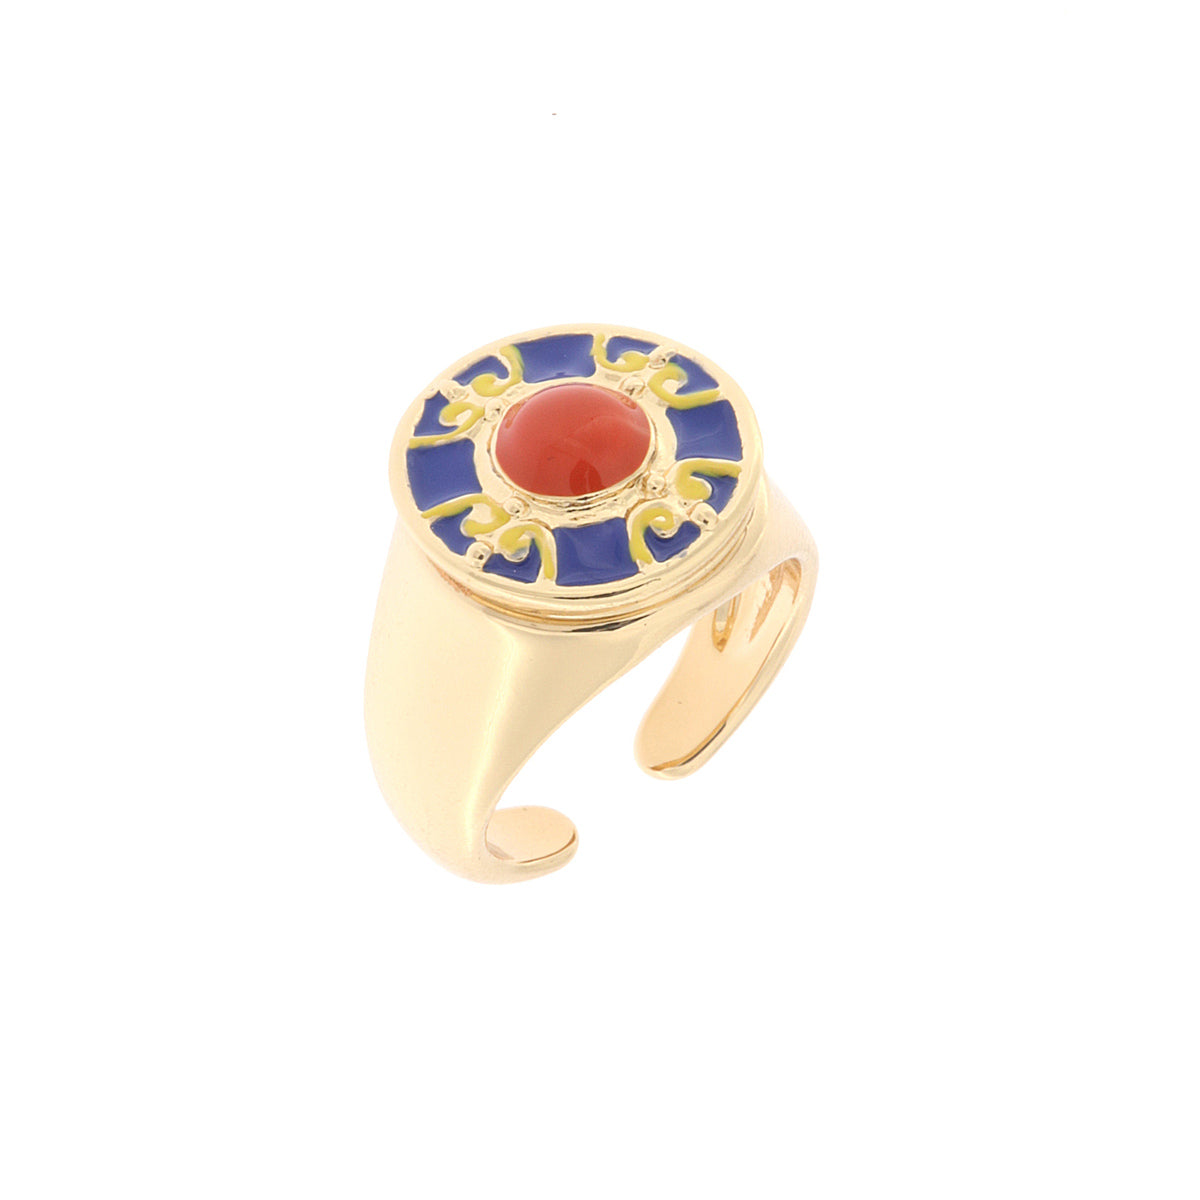 Metal ring with majolica